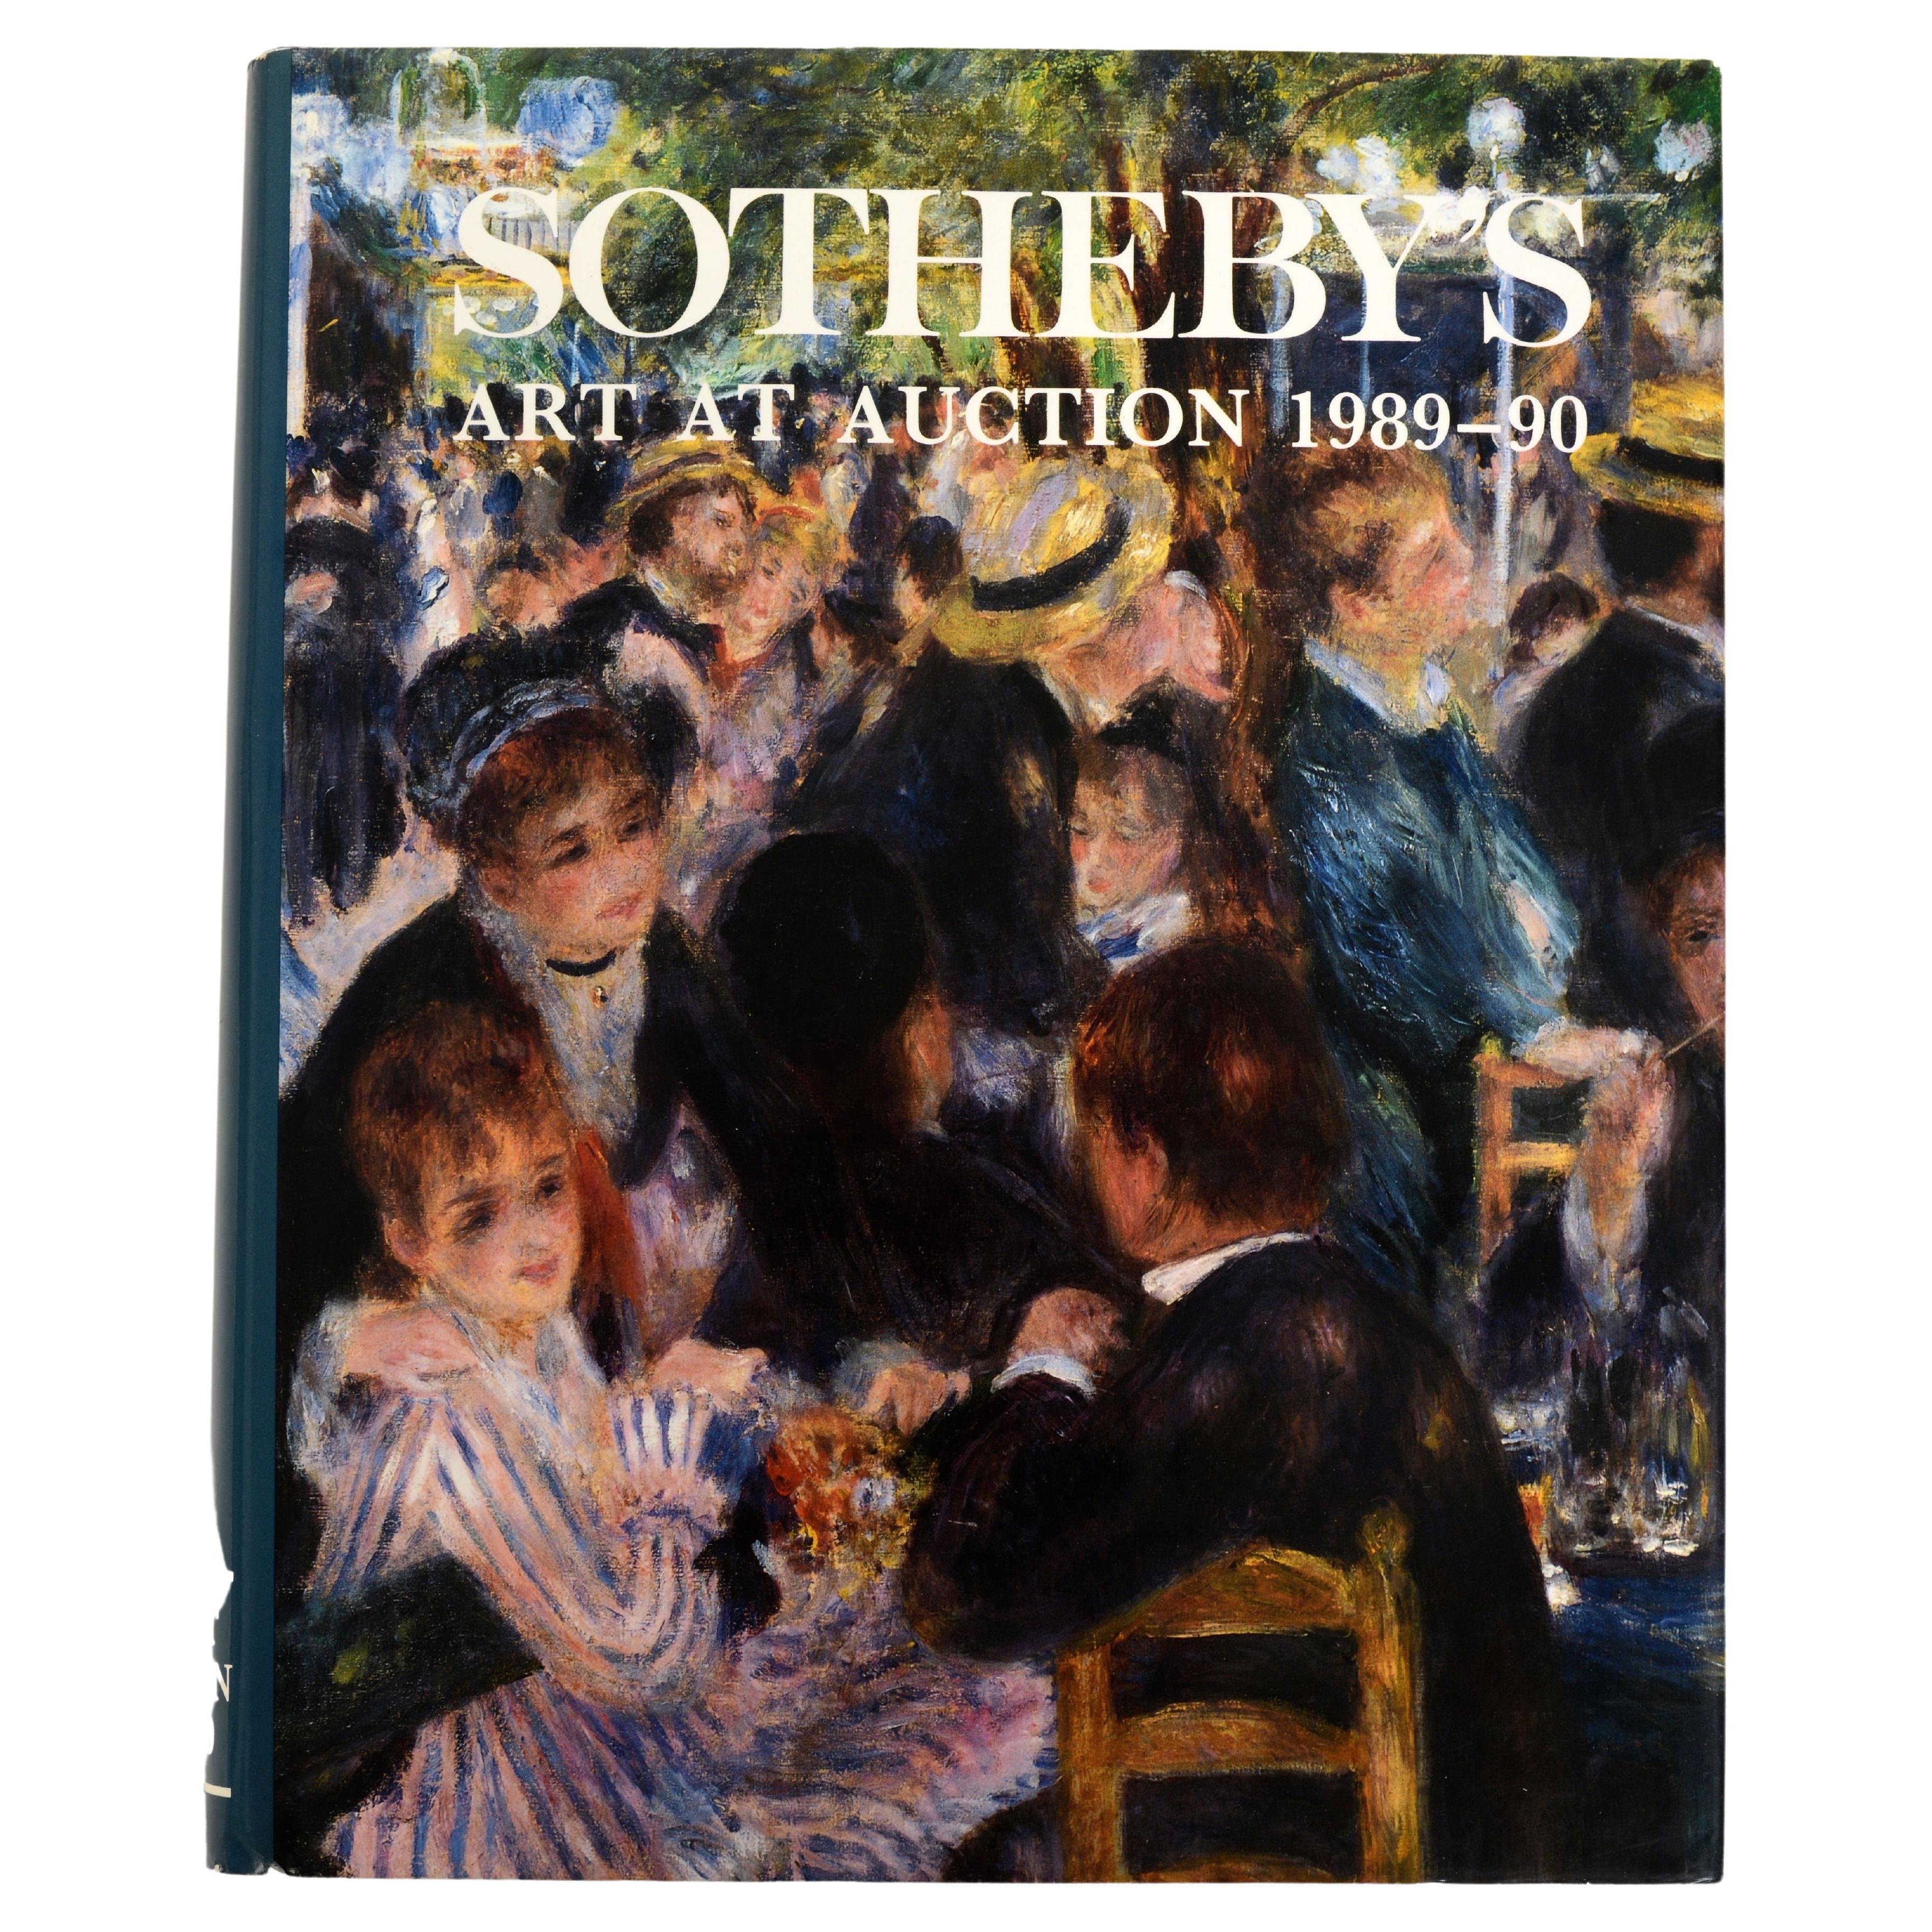 Sotheby's Art at Auction - 1989-1990 by Sally Prideaux 'Editor', 1st Ed